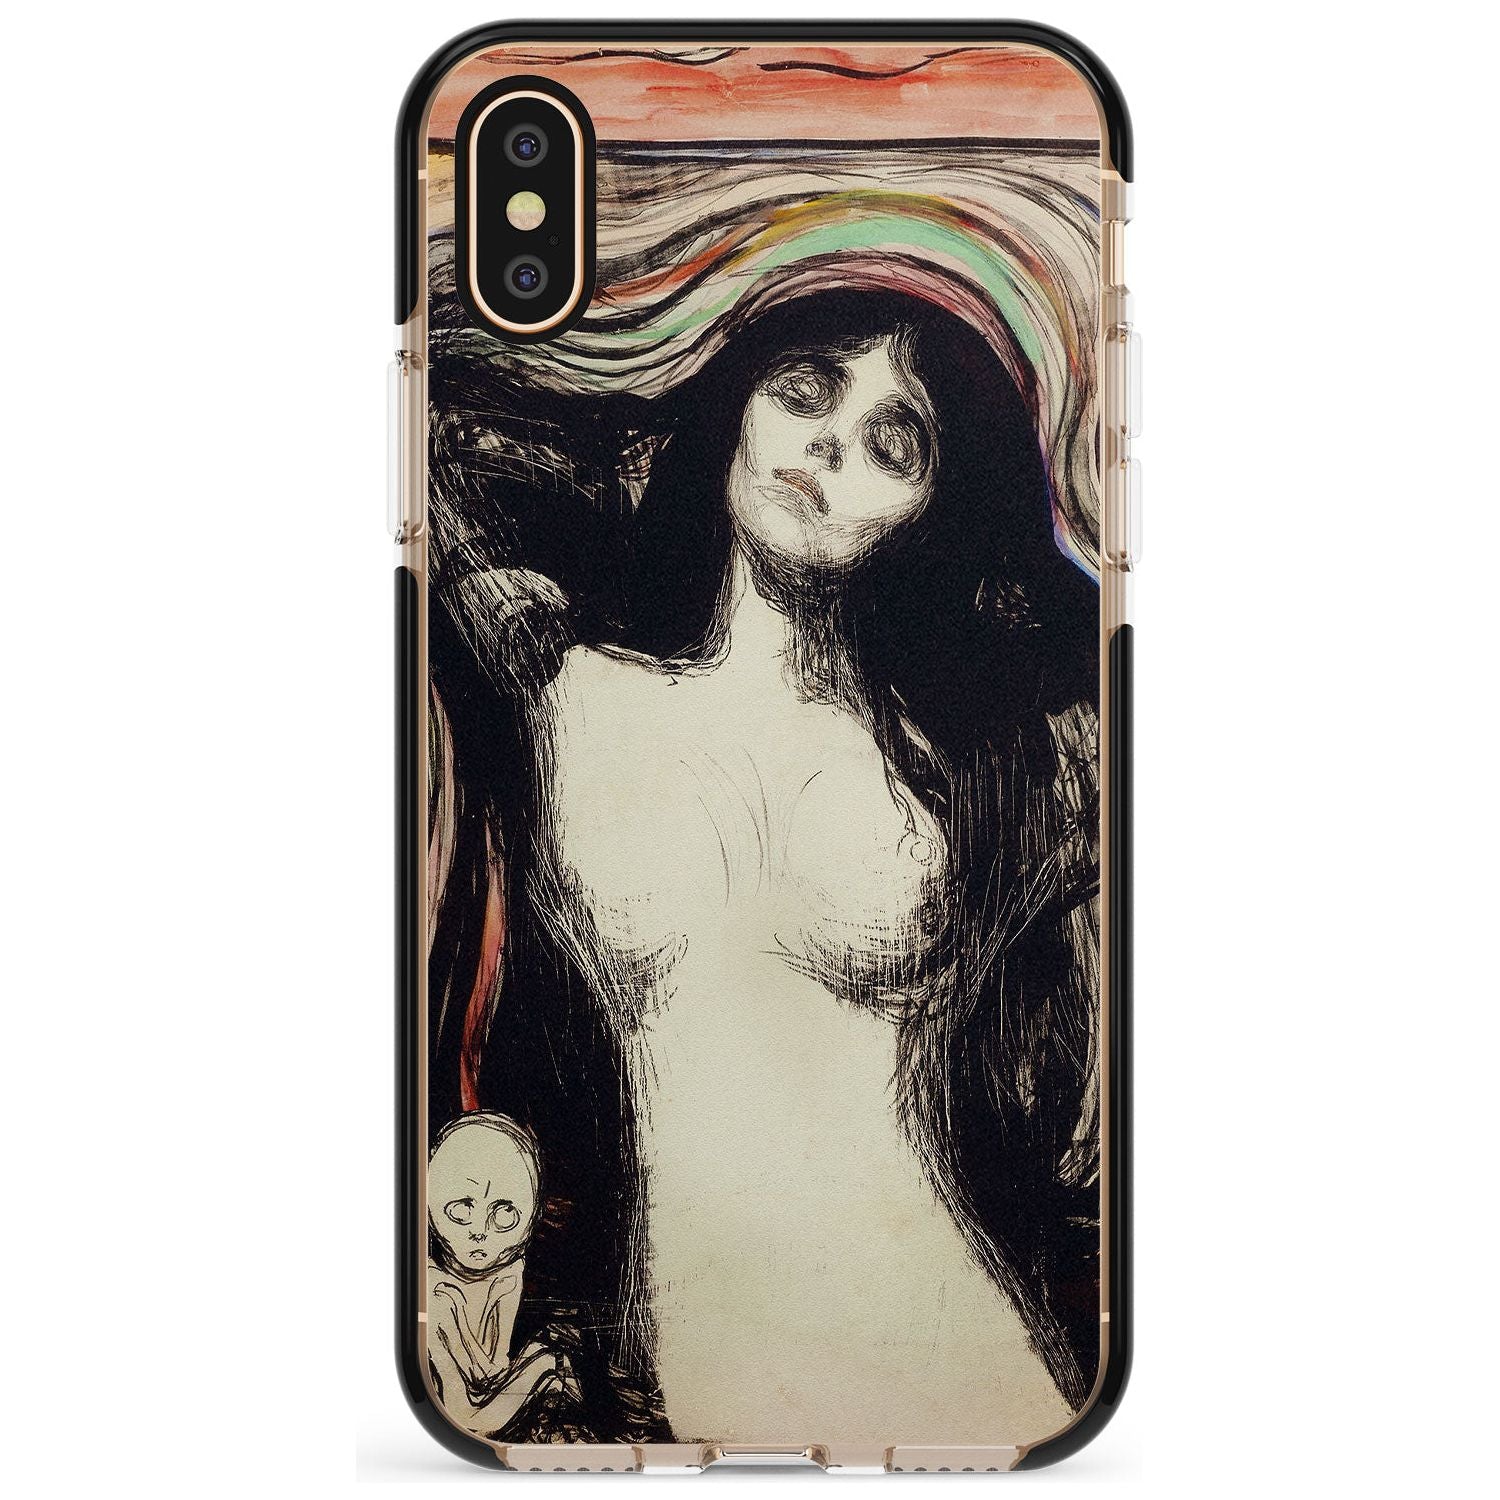 Madonna Black Impact Phone Case for iPhone X XS Max XR